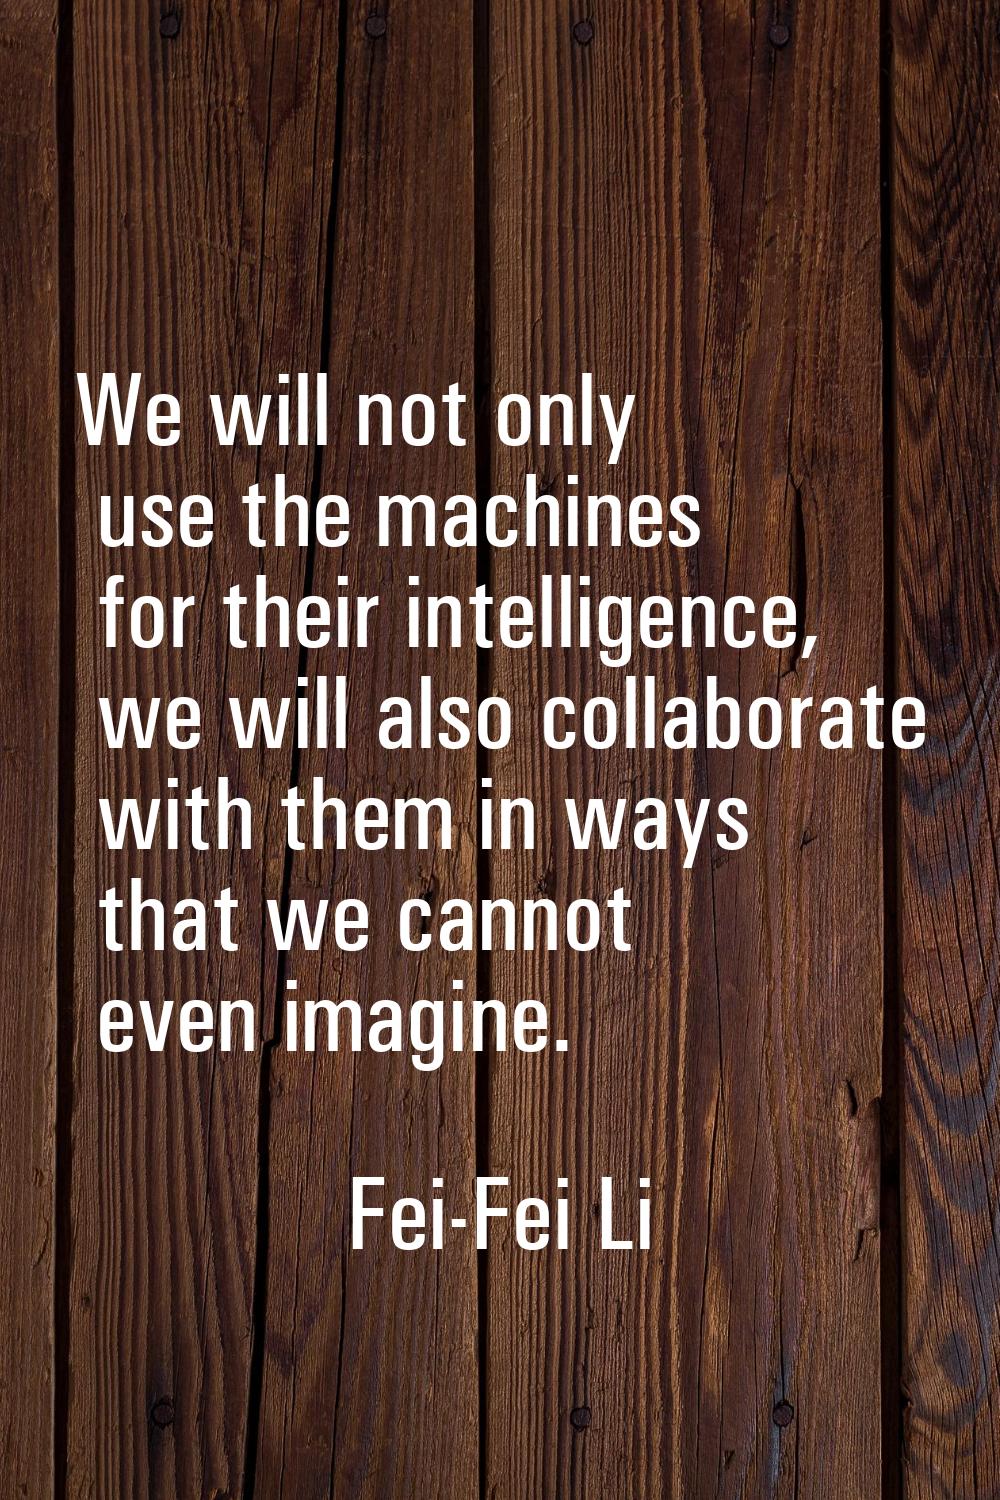 We will not only use the machines for their intelligence, we will also collaborate with them in way